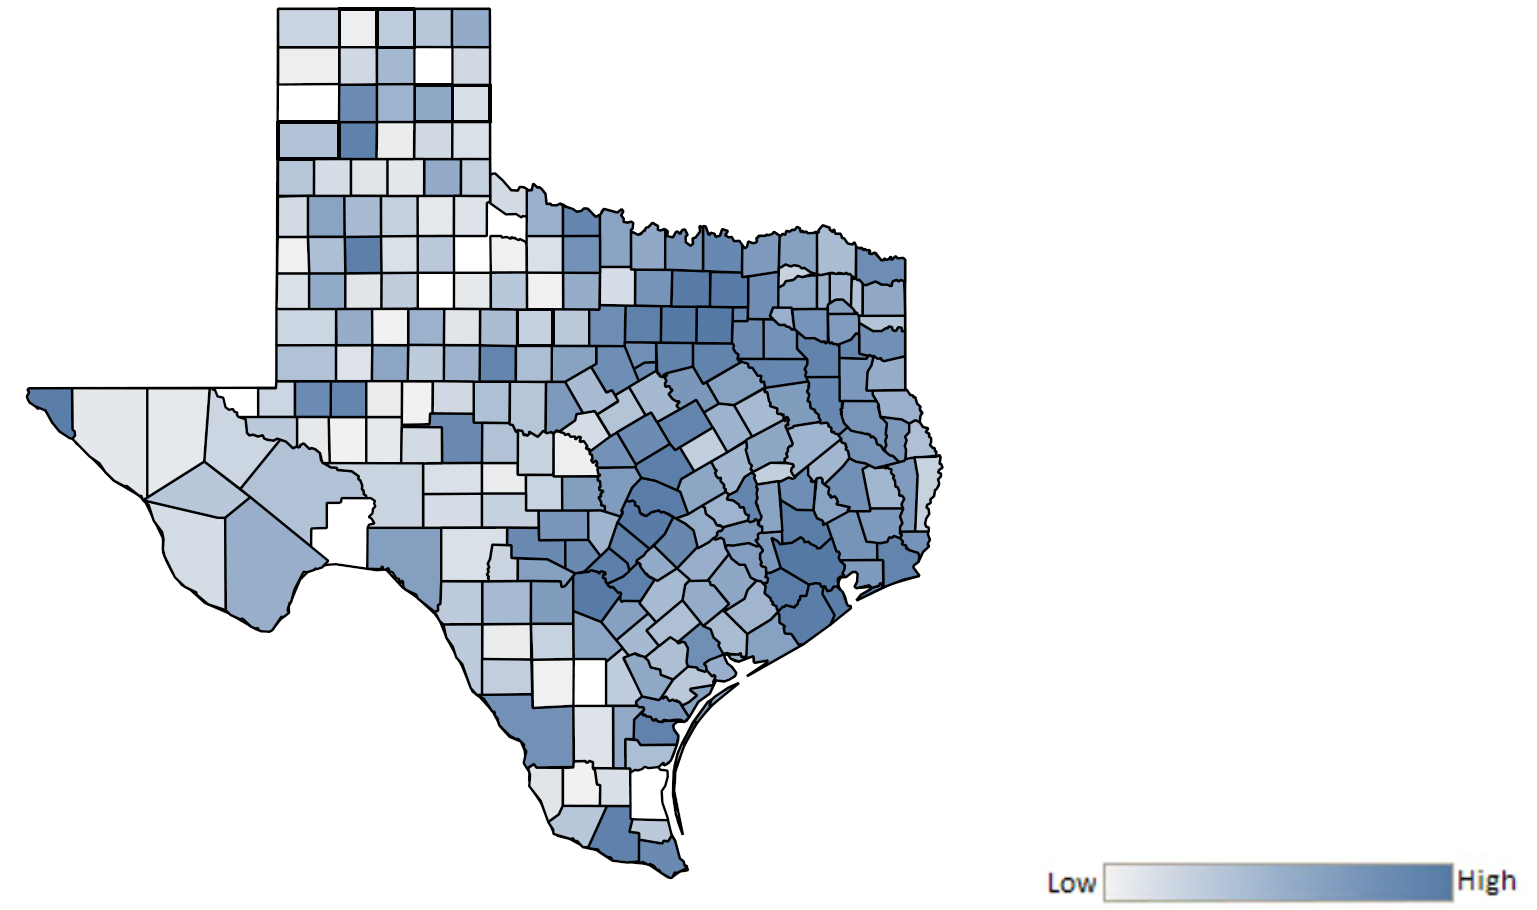 Map of Texas counties indicating relative number of complaints from low to high. See attached CSV file for complaint data by jurisdiction.